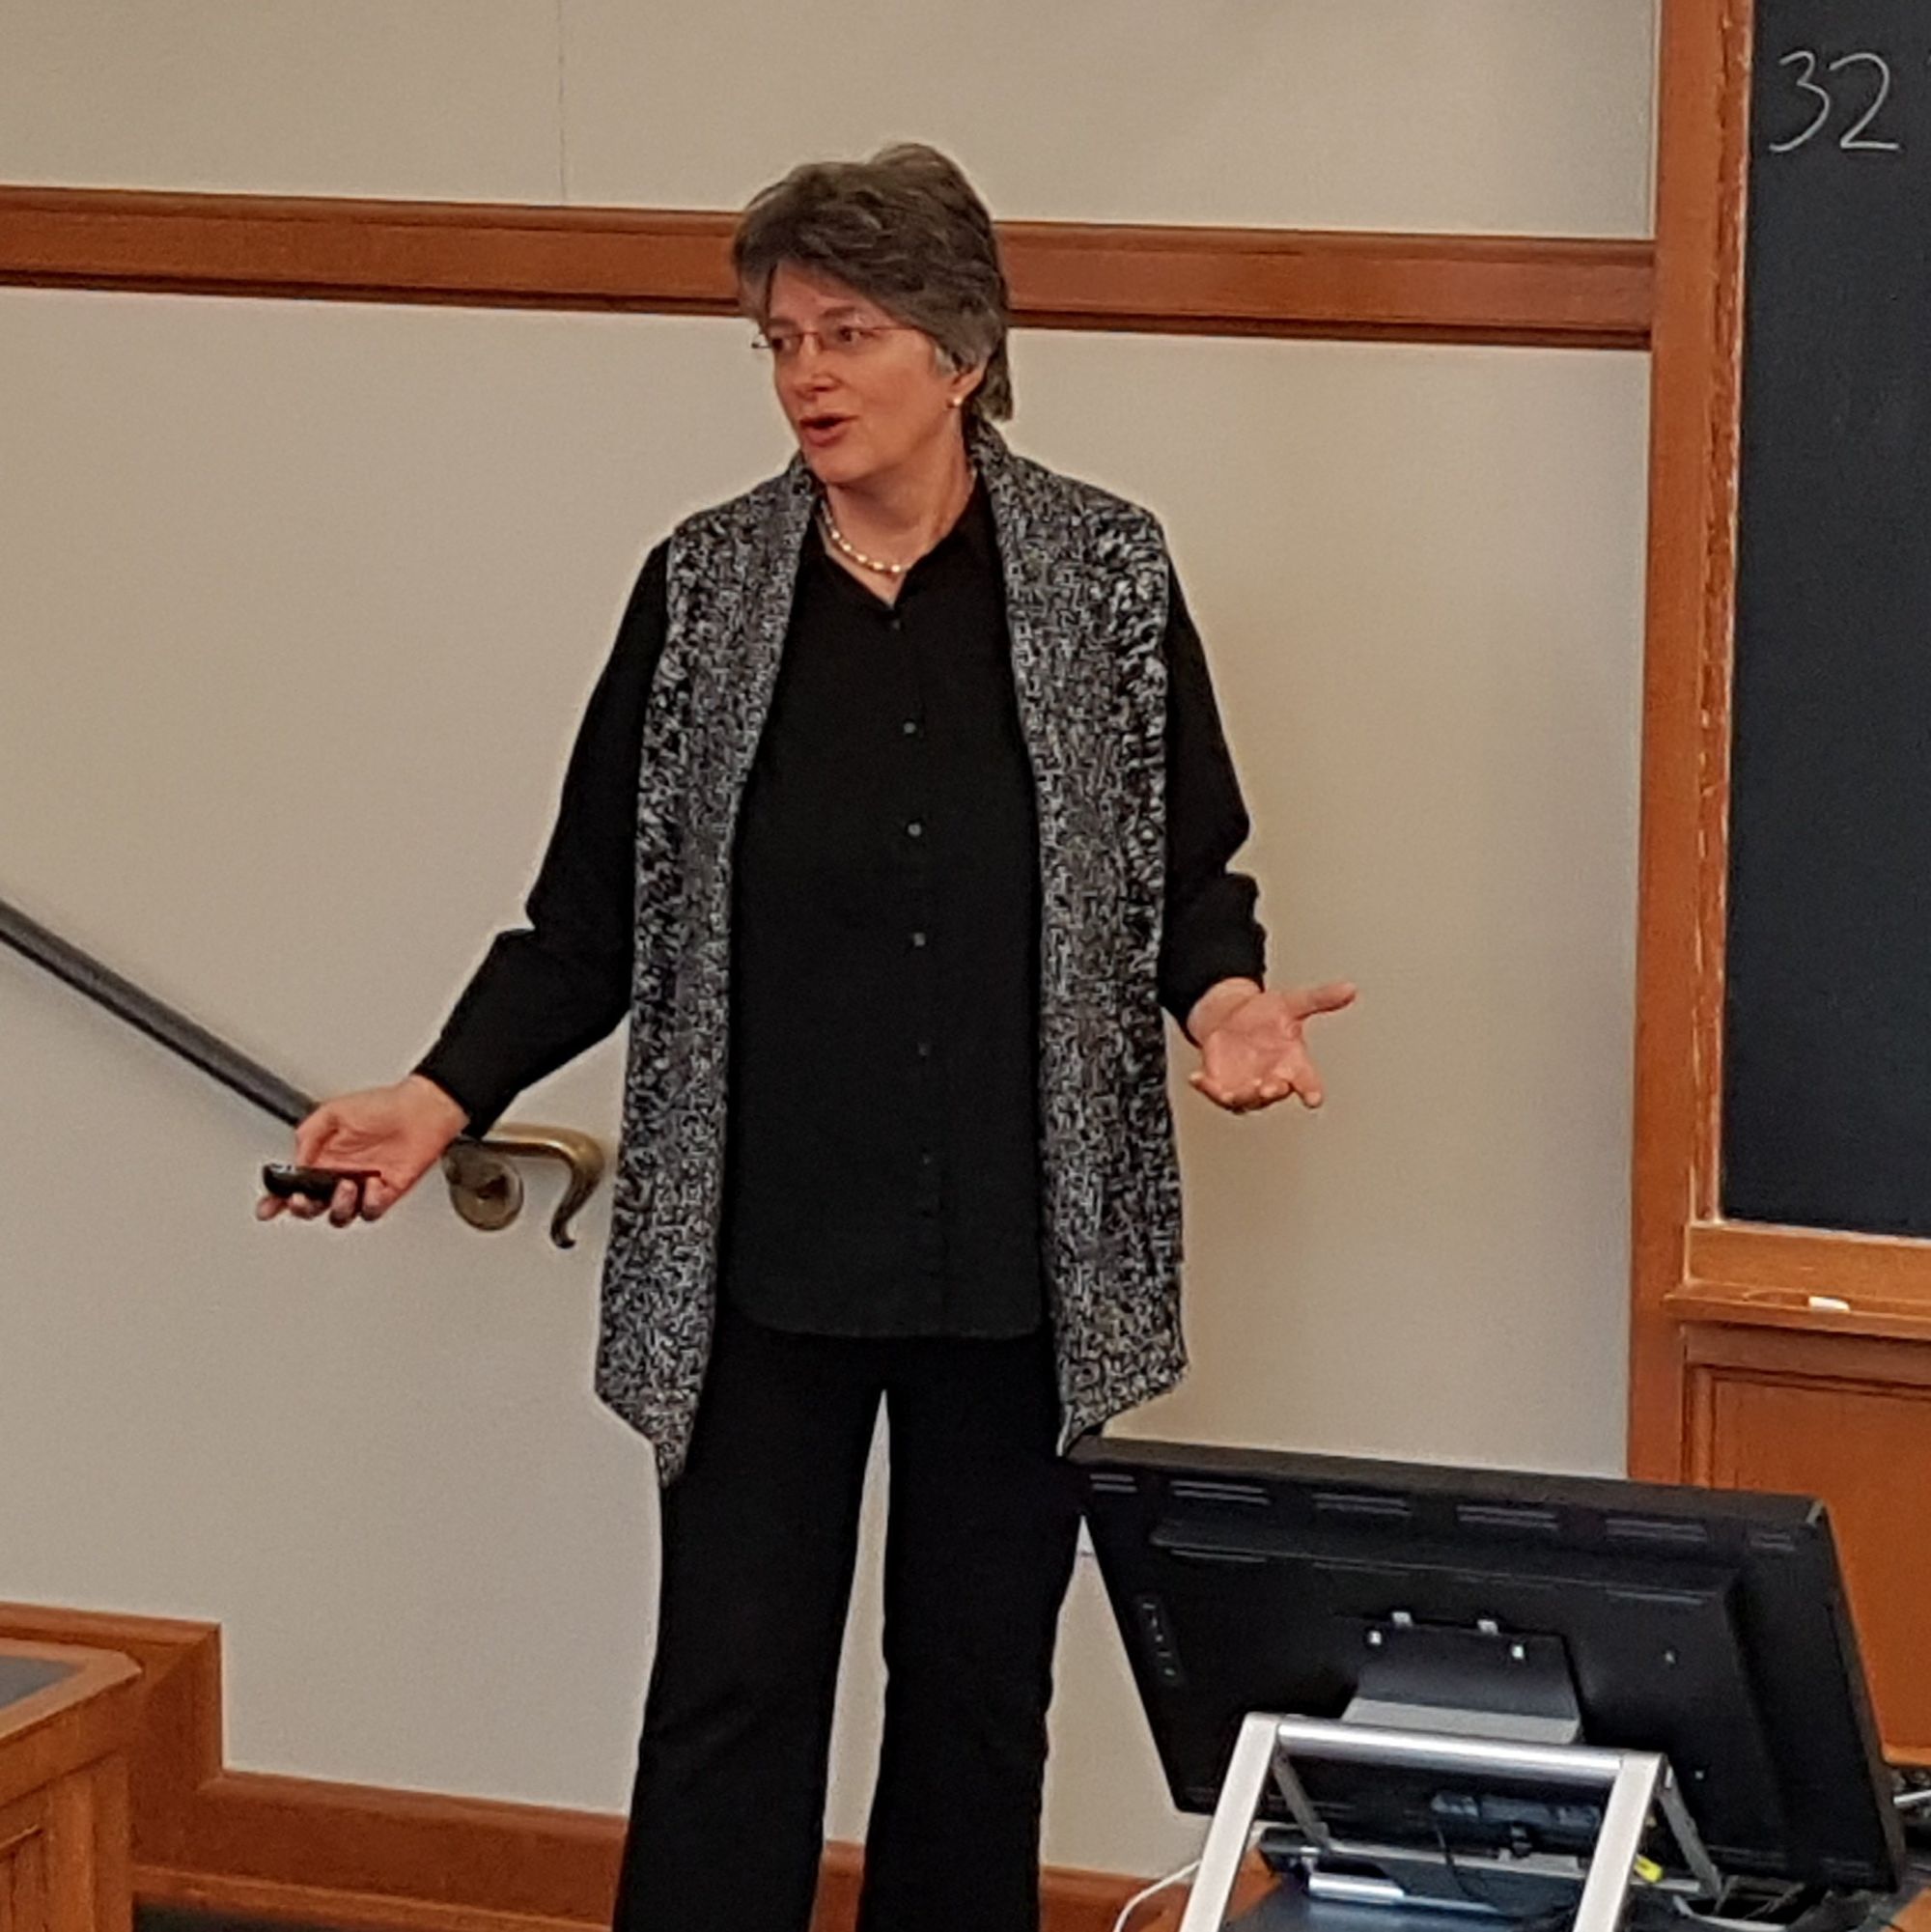 April Lorenzen in a training session at Yale School of Law, pre-pandemic